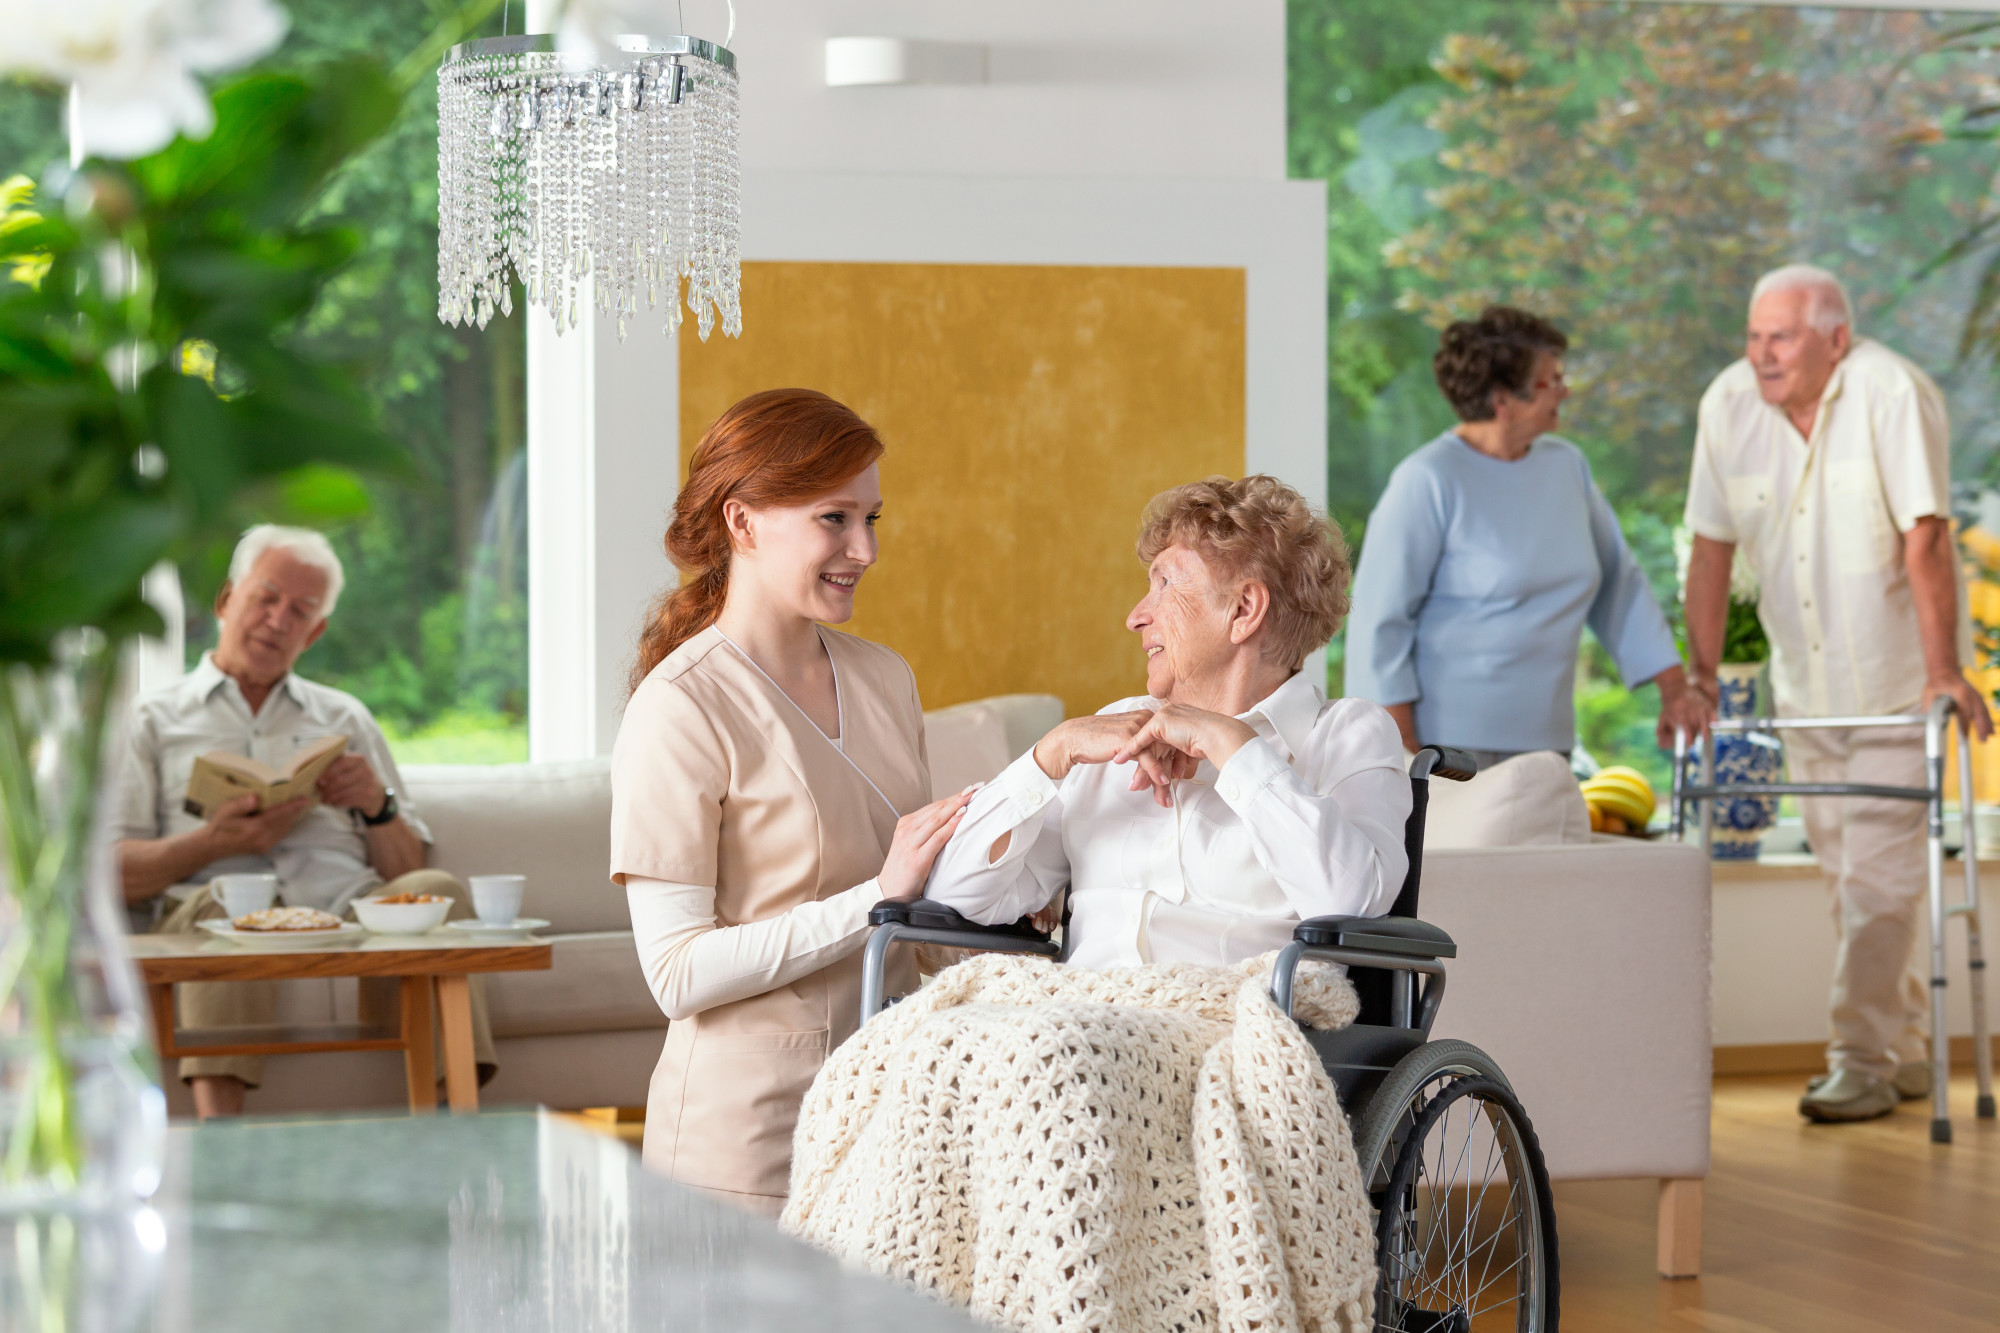 assisted living vs nursing home costs: How much do you know about the differences between the two? Read on to learn more about the differences between them.